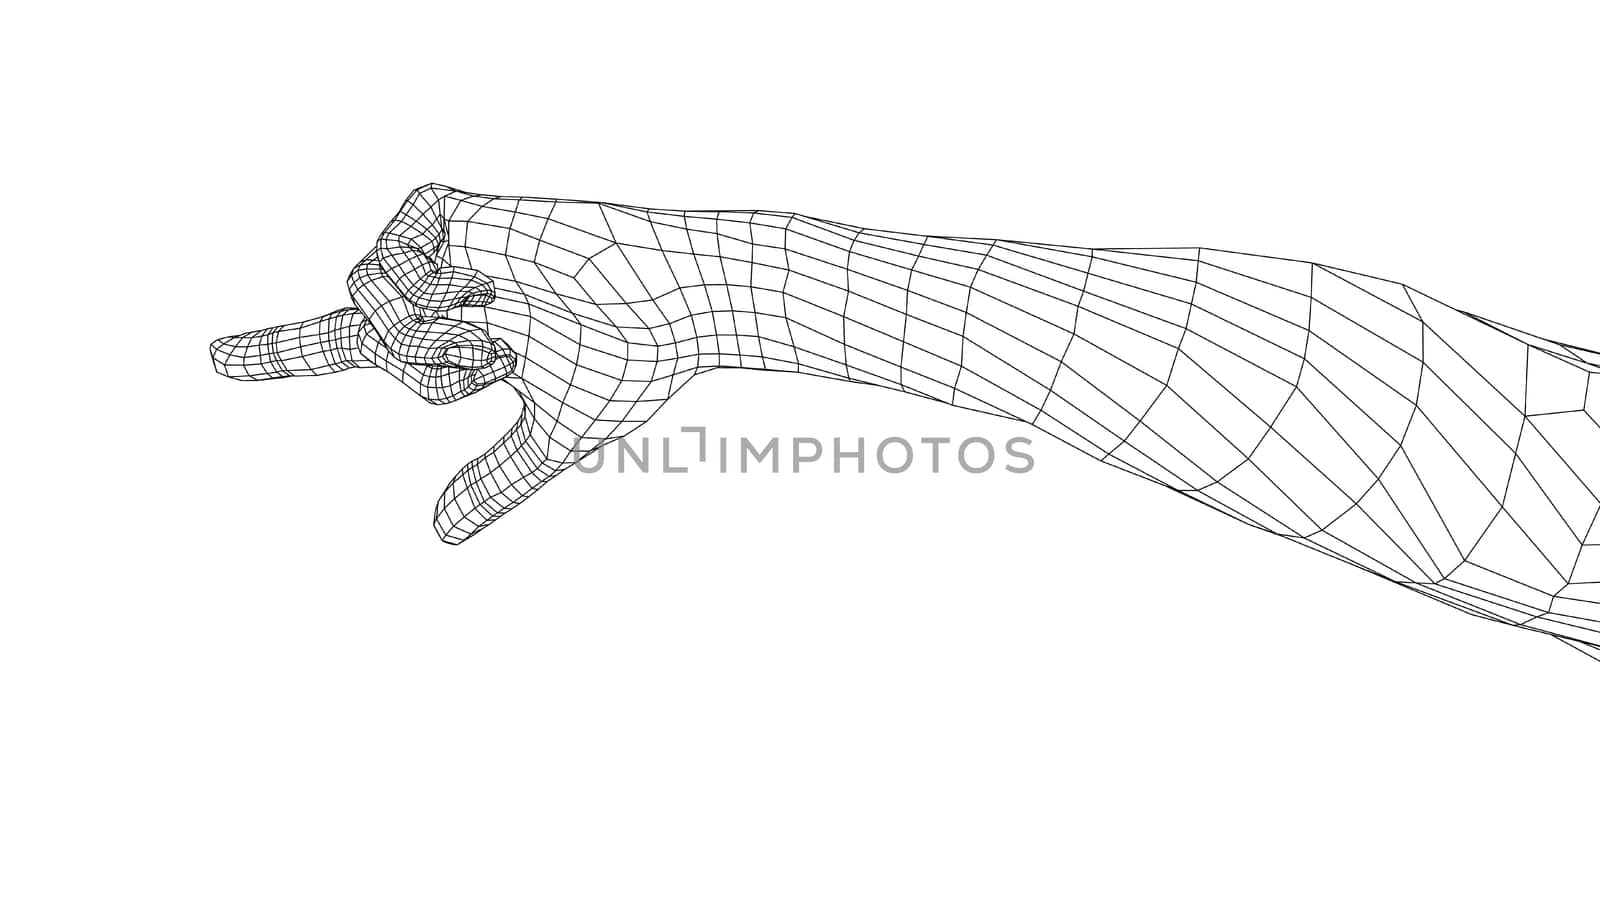 Human hand point with finger. 3d illustration. Wire-frame style